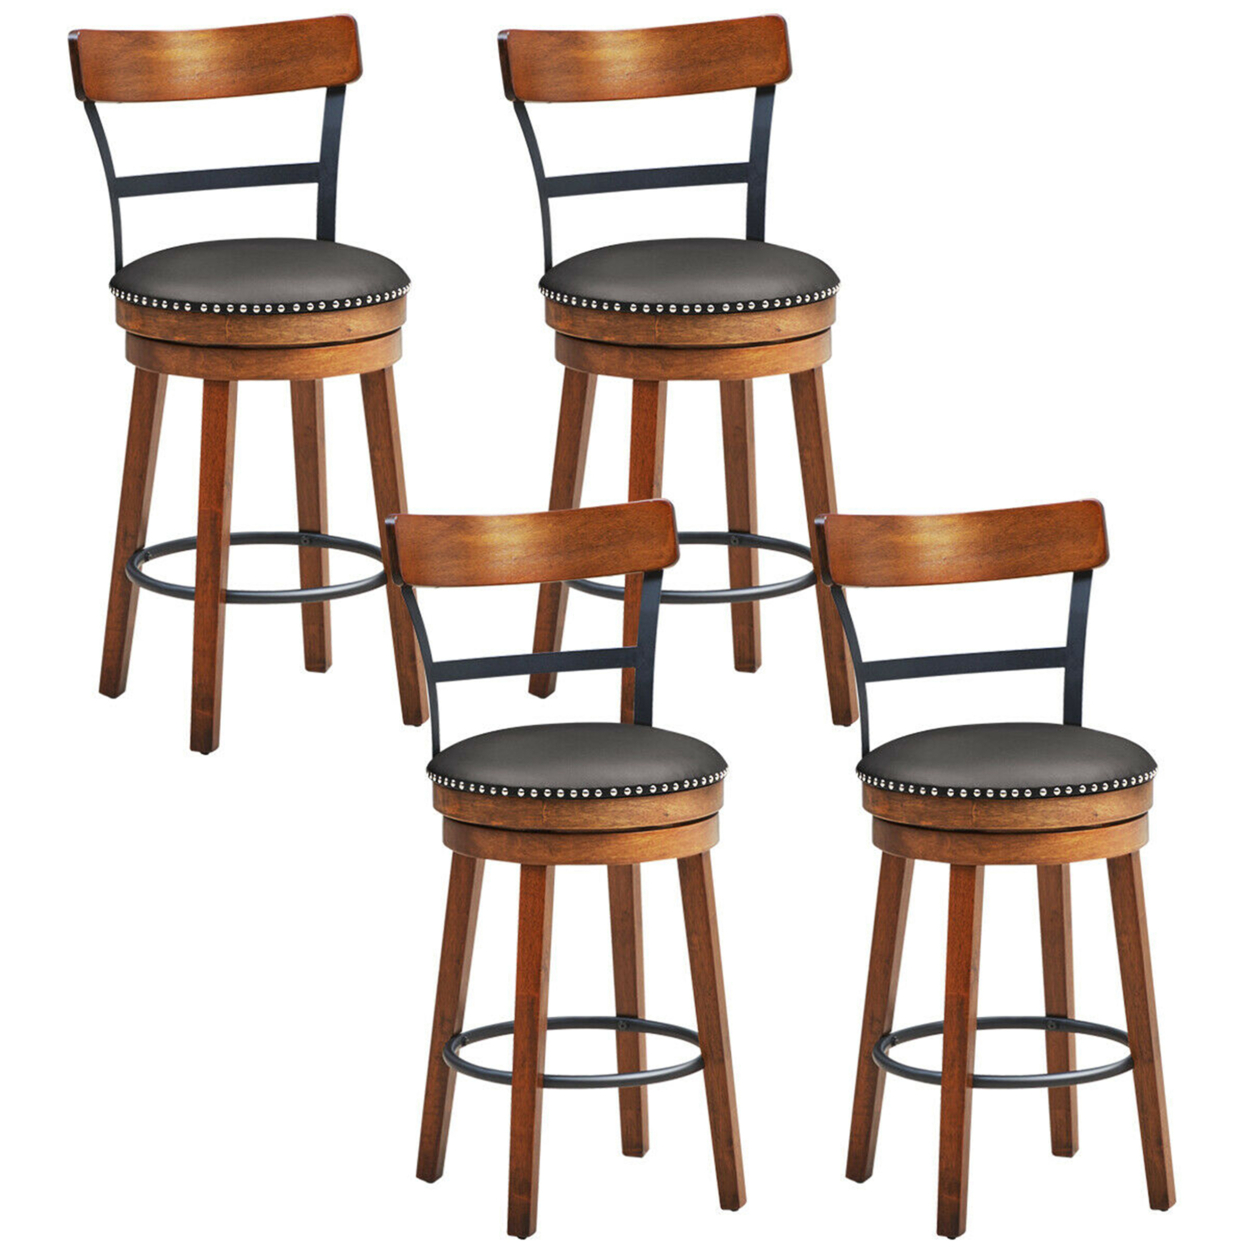 Set Of 4 BarStool 25.5'' Swivel Counter Height Dining Chair With Rubber Wood Legs